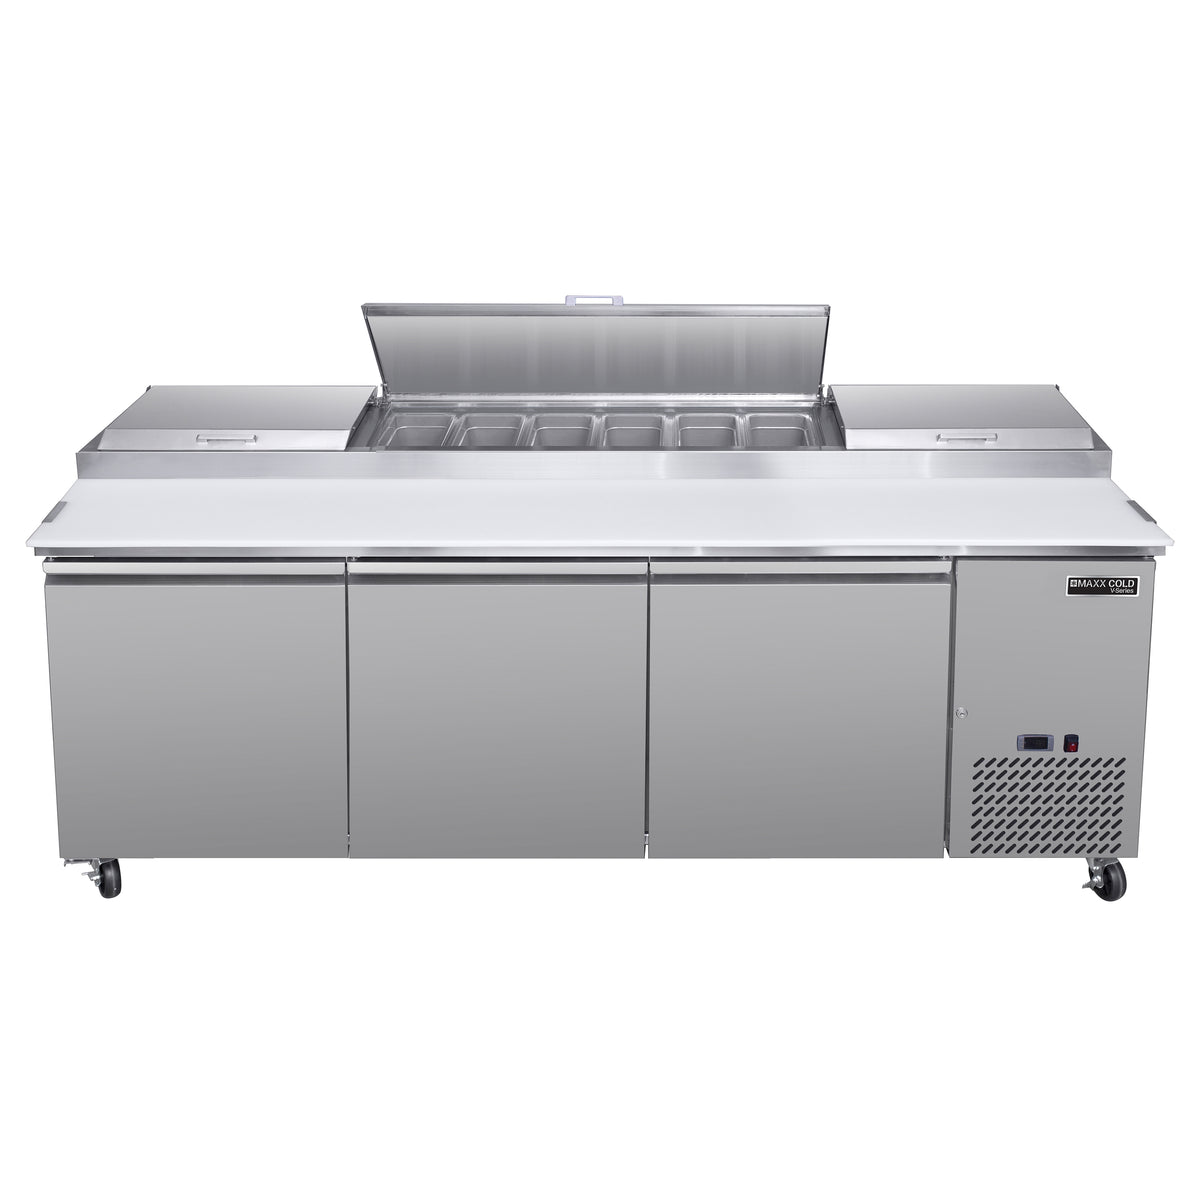 Maxx Cold MVPP92HC V-Series 3 Door Refrigerated Pizza Prep Table, 92"W, 30.8 cu ft, in Stainless Steel